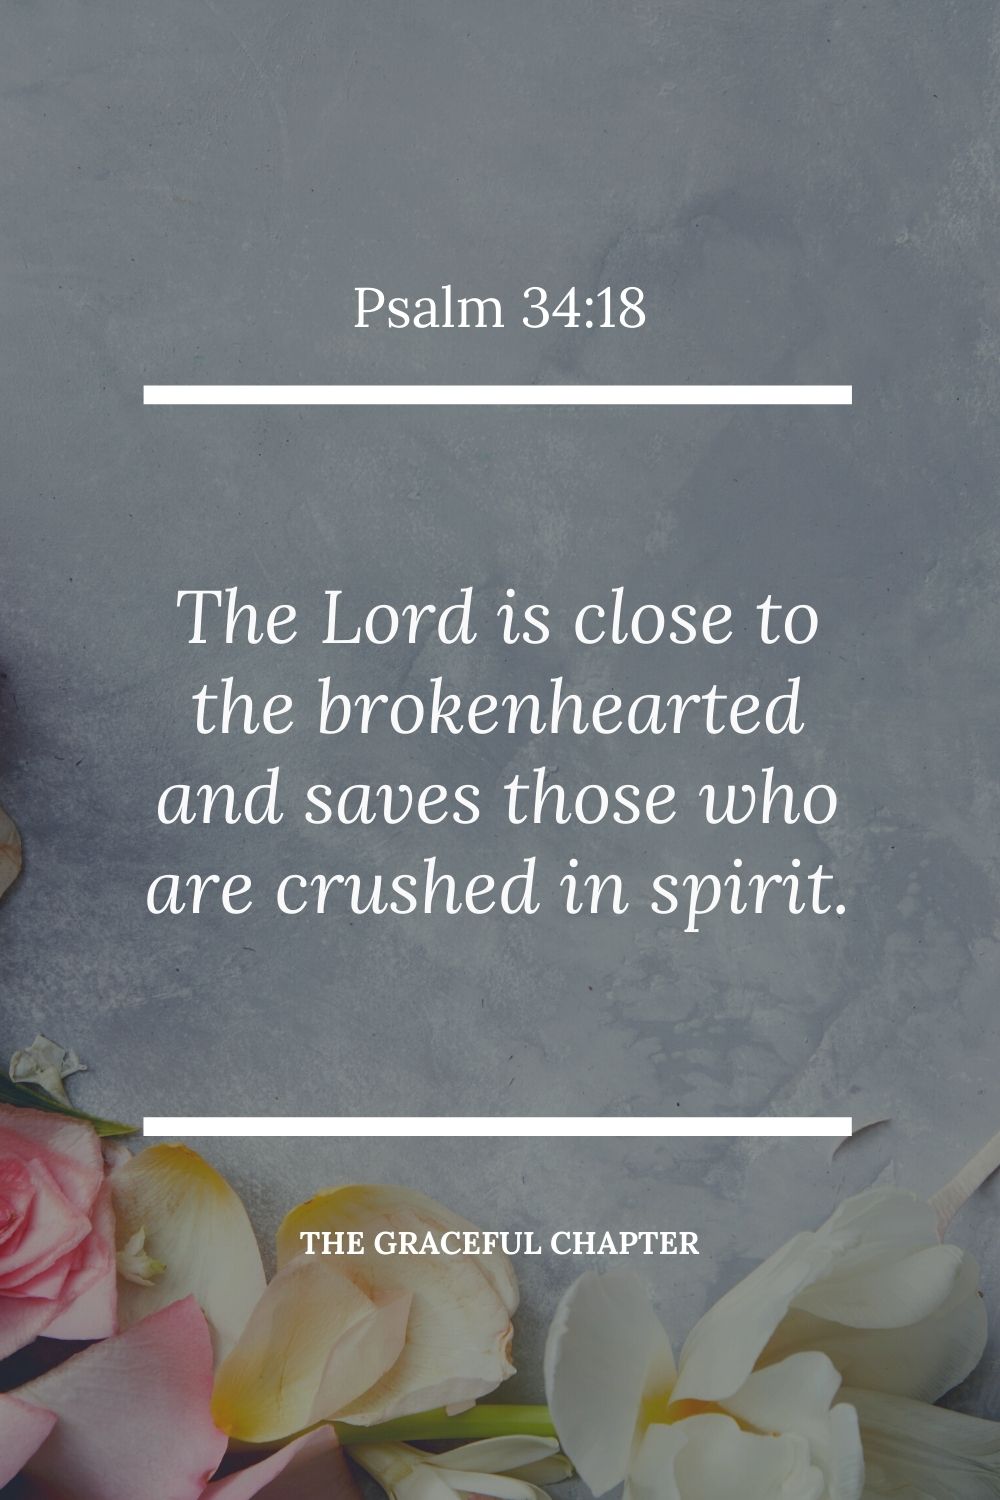 The Lord is close to the brokenhearted and saves those who are crushed in spirit. Psalm 34:18